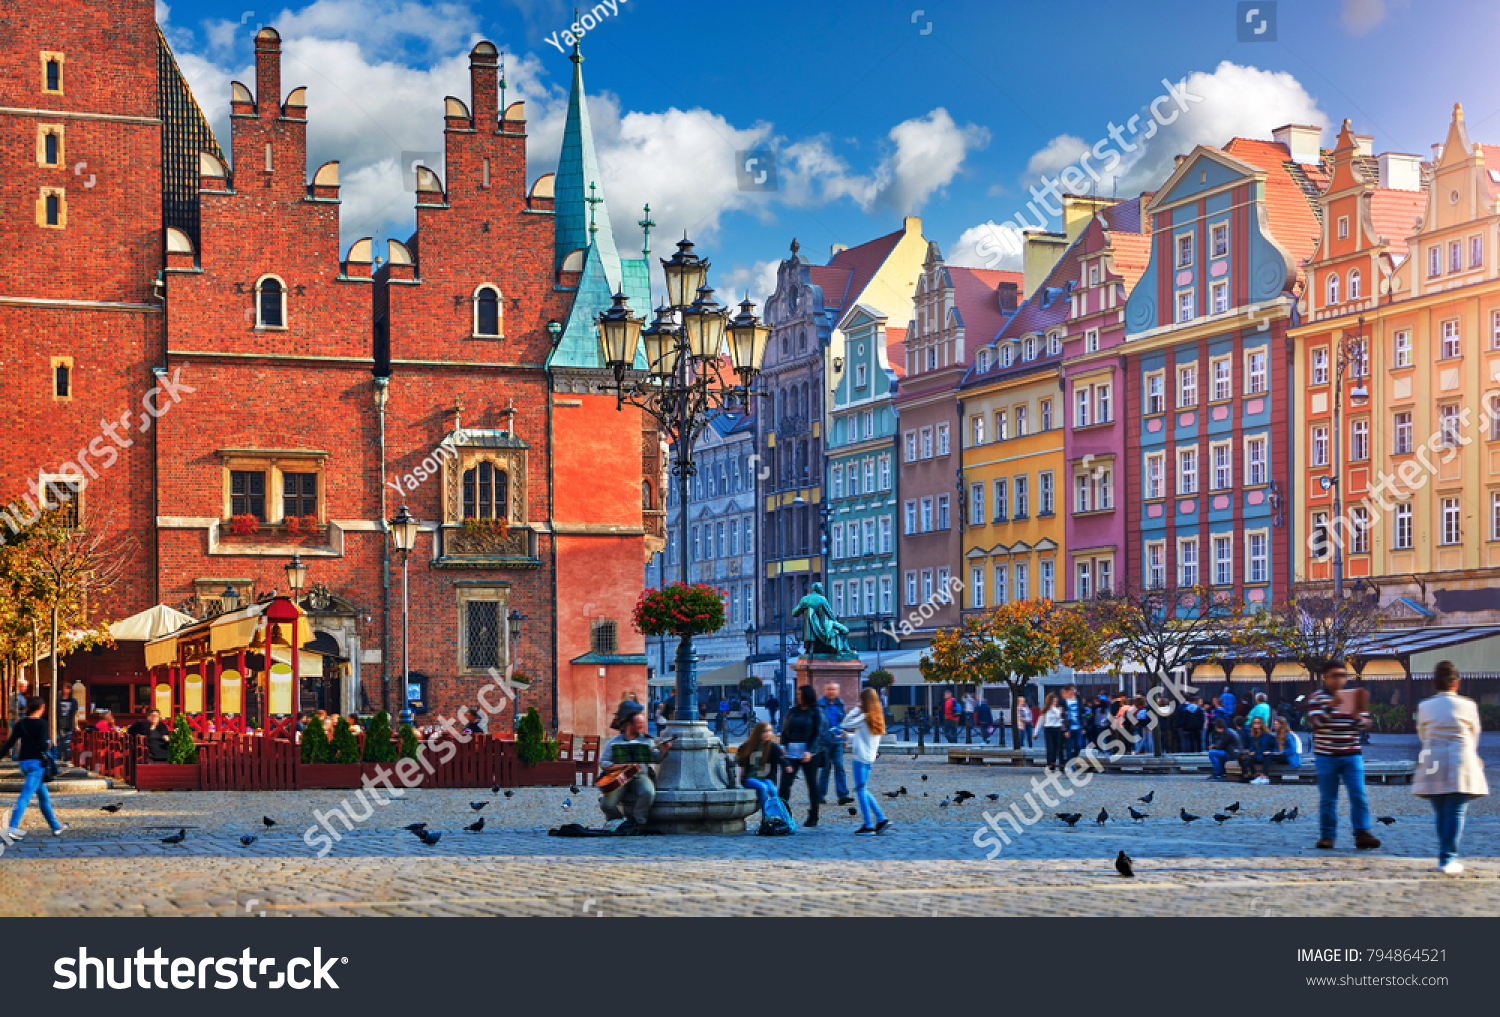 Wroclaw central market square with old colourful houses, street lamp and walking tourists people at evening sunset sunshine. #794864521